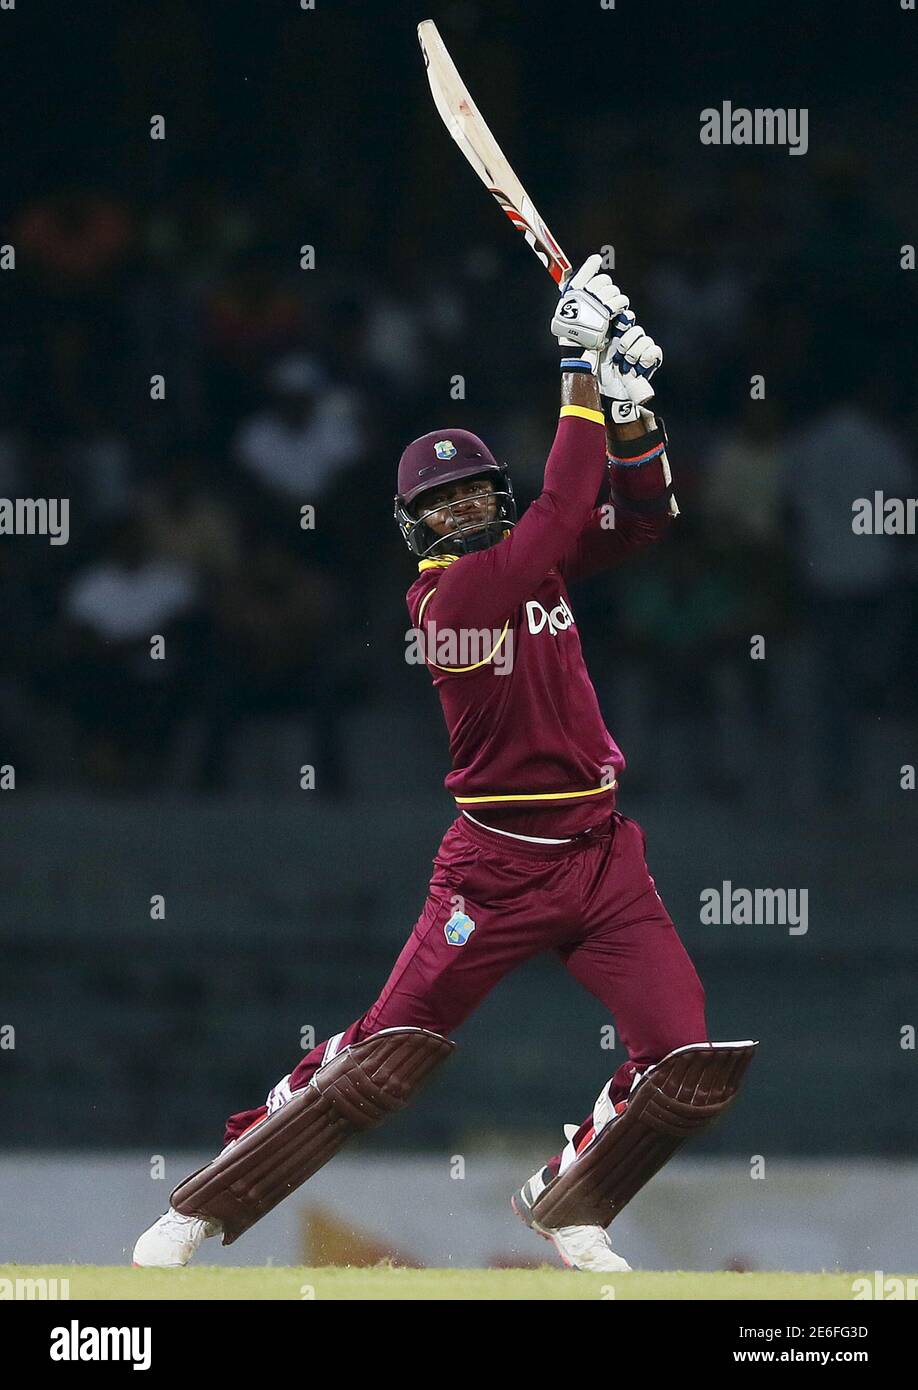 West Indies' Marlon Samuels hits a six during the second One Day International cricket match against Sri Lanka in Colombo November 4, 2015. REUTERS/Dinuka Liyanawatte Stock Photo